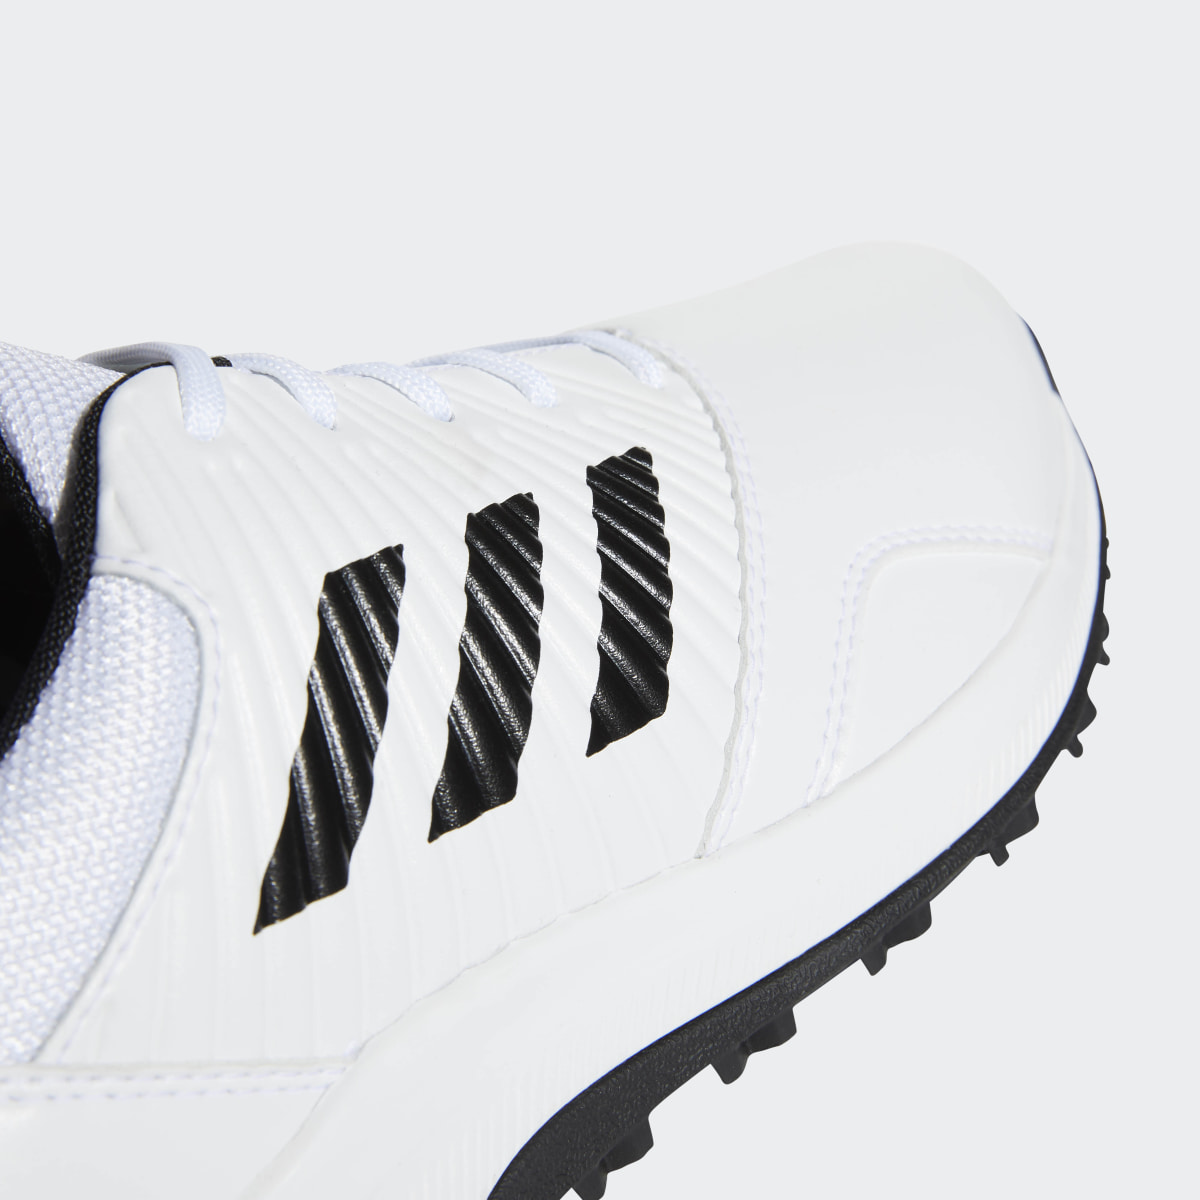 Adidas CP Traxion Spikeless Shoes. 10